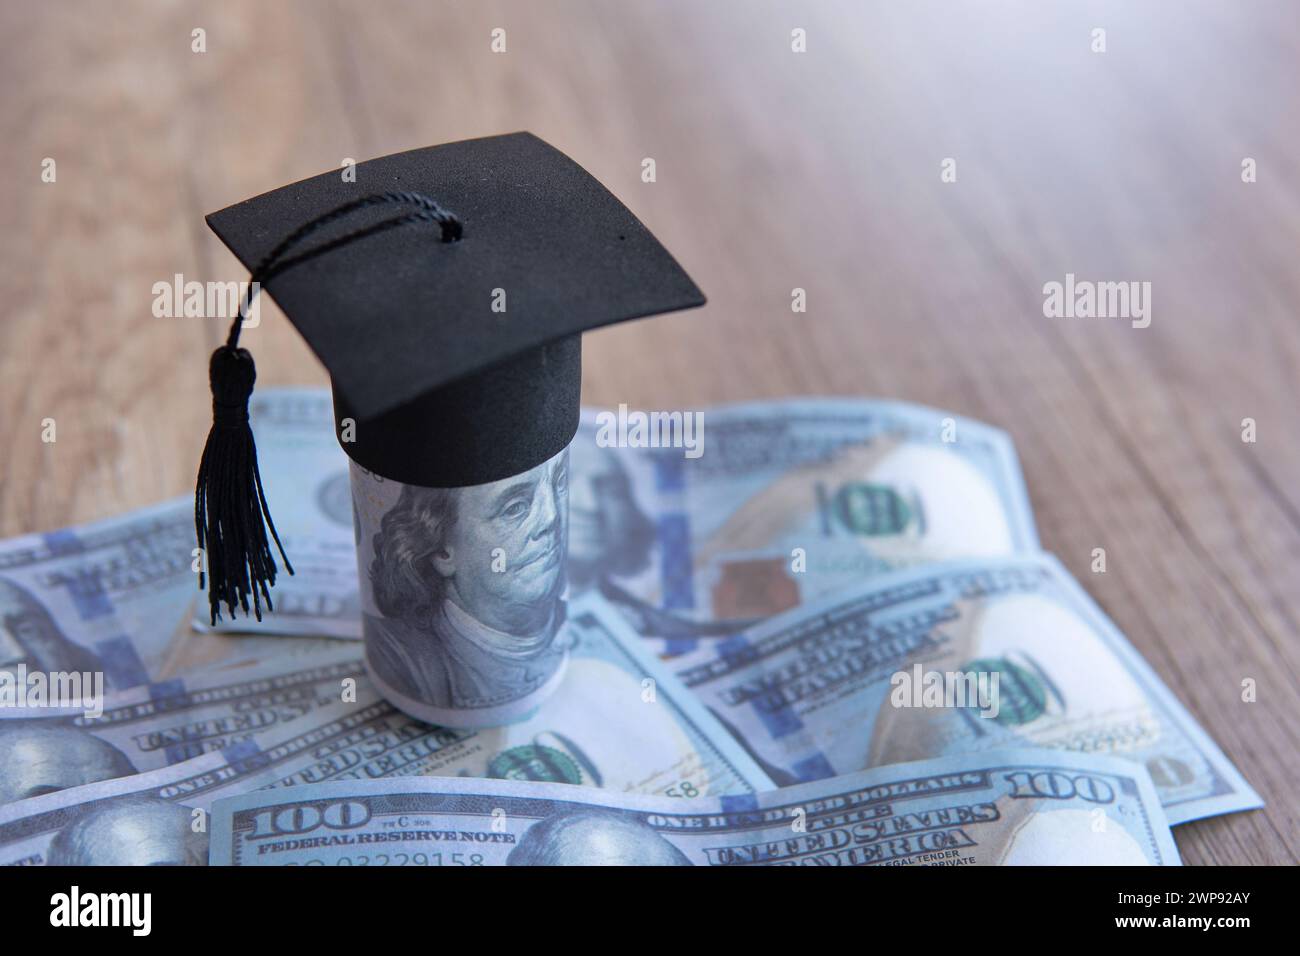 Closeup image of graduation cap and money on table. Scholarship, educational fees concept. Copy space for text. Stock Photo